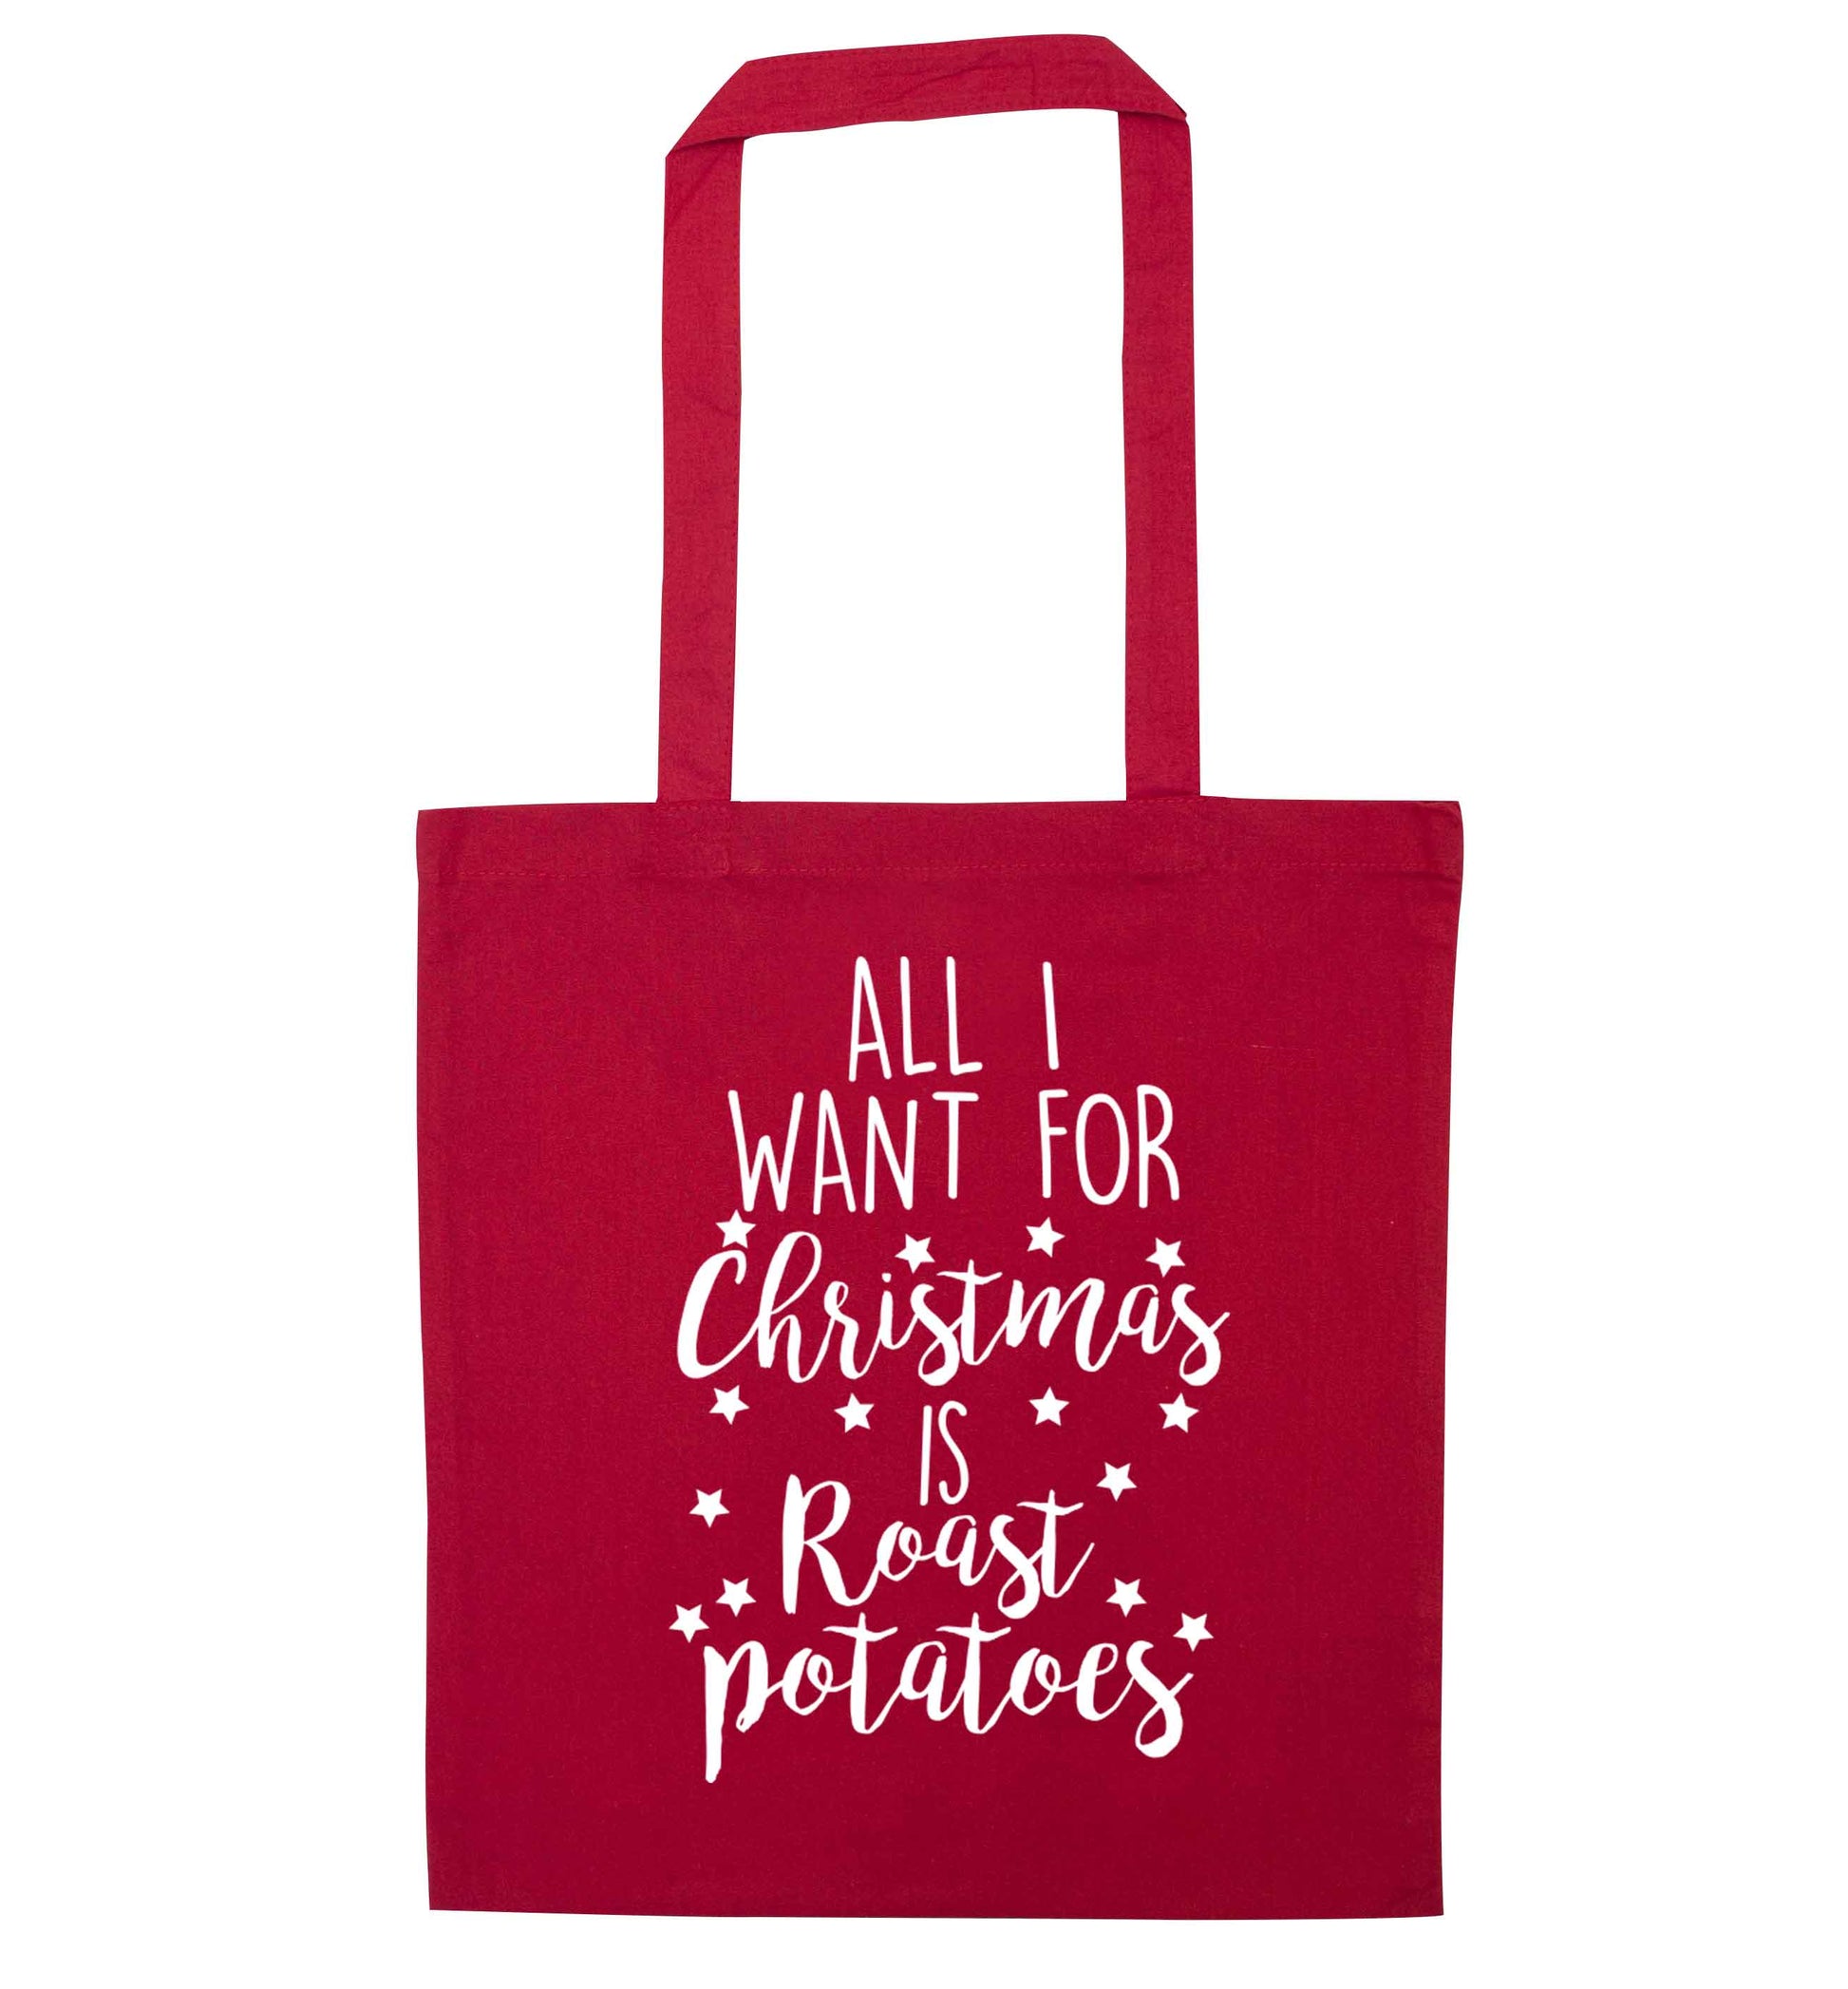 All I want for Christmas is roast potatoes red tote bag